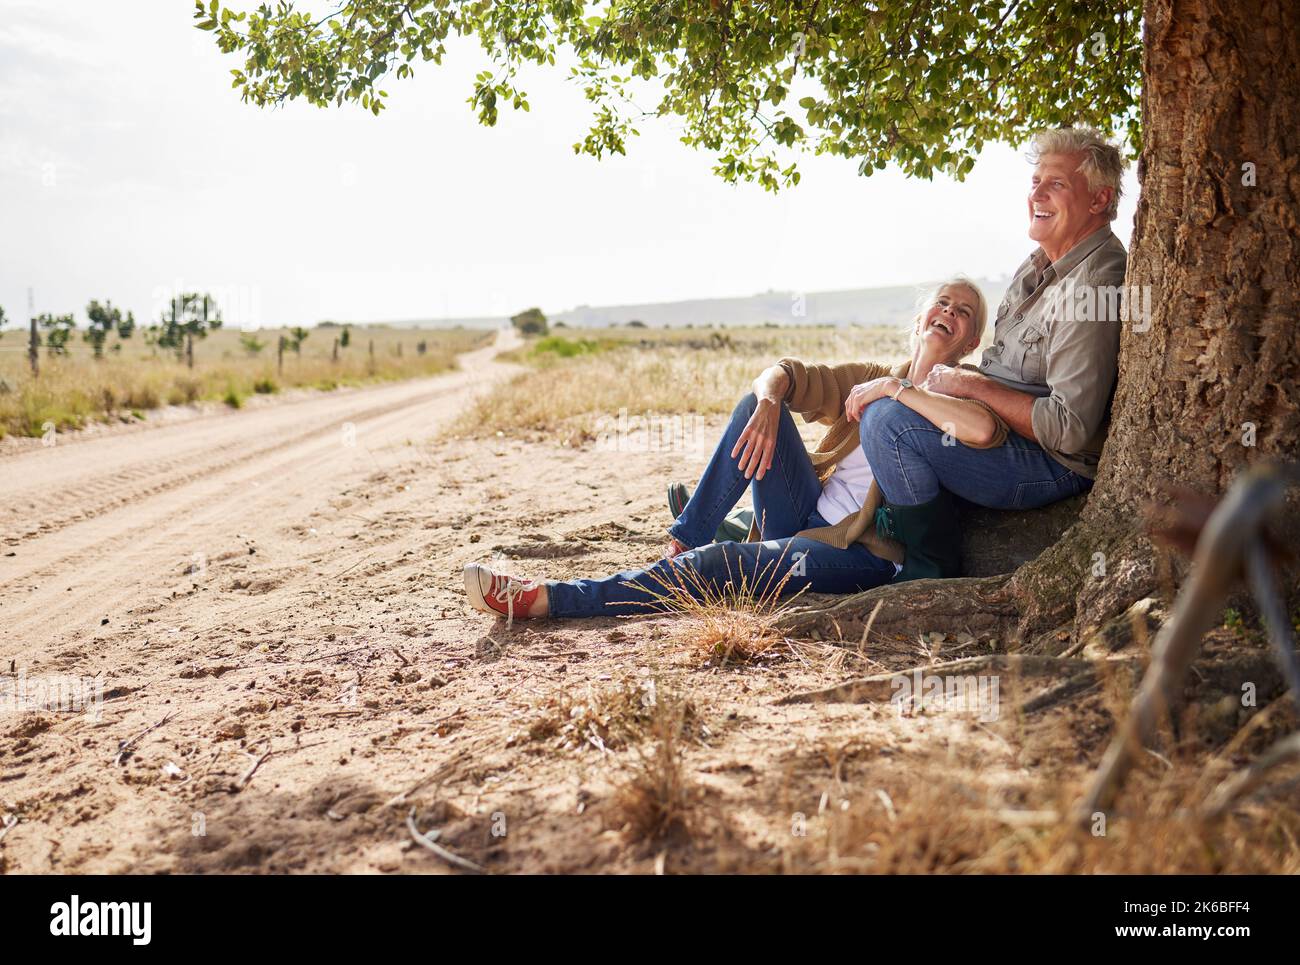 This is the life we choose and love. a senior couple sitting together under a tree. Stock Photo